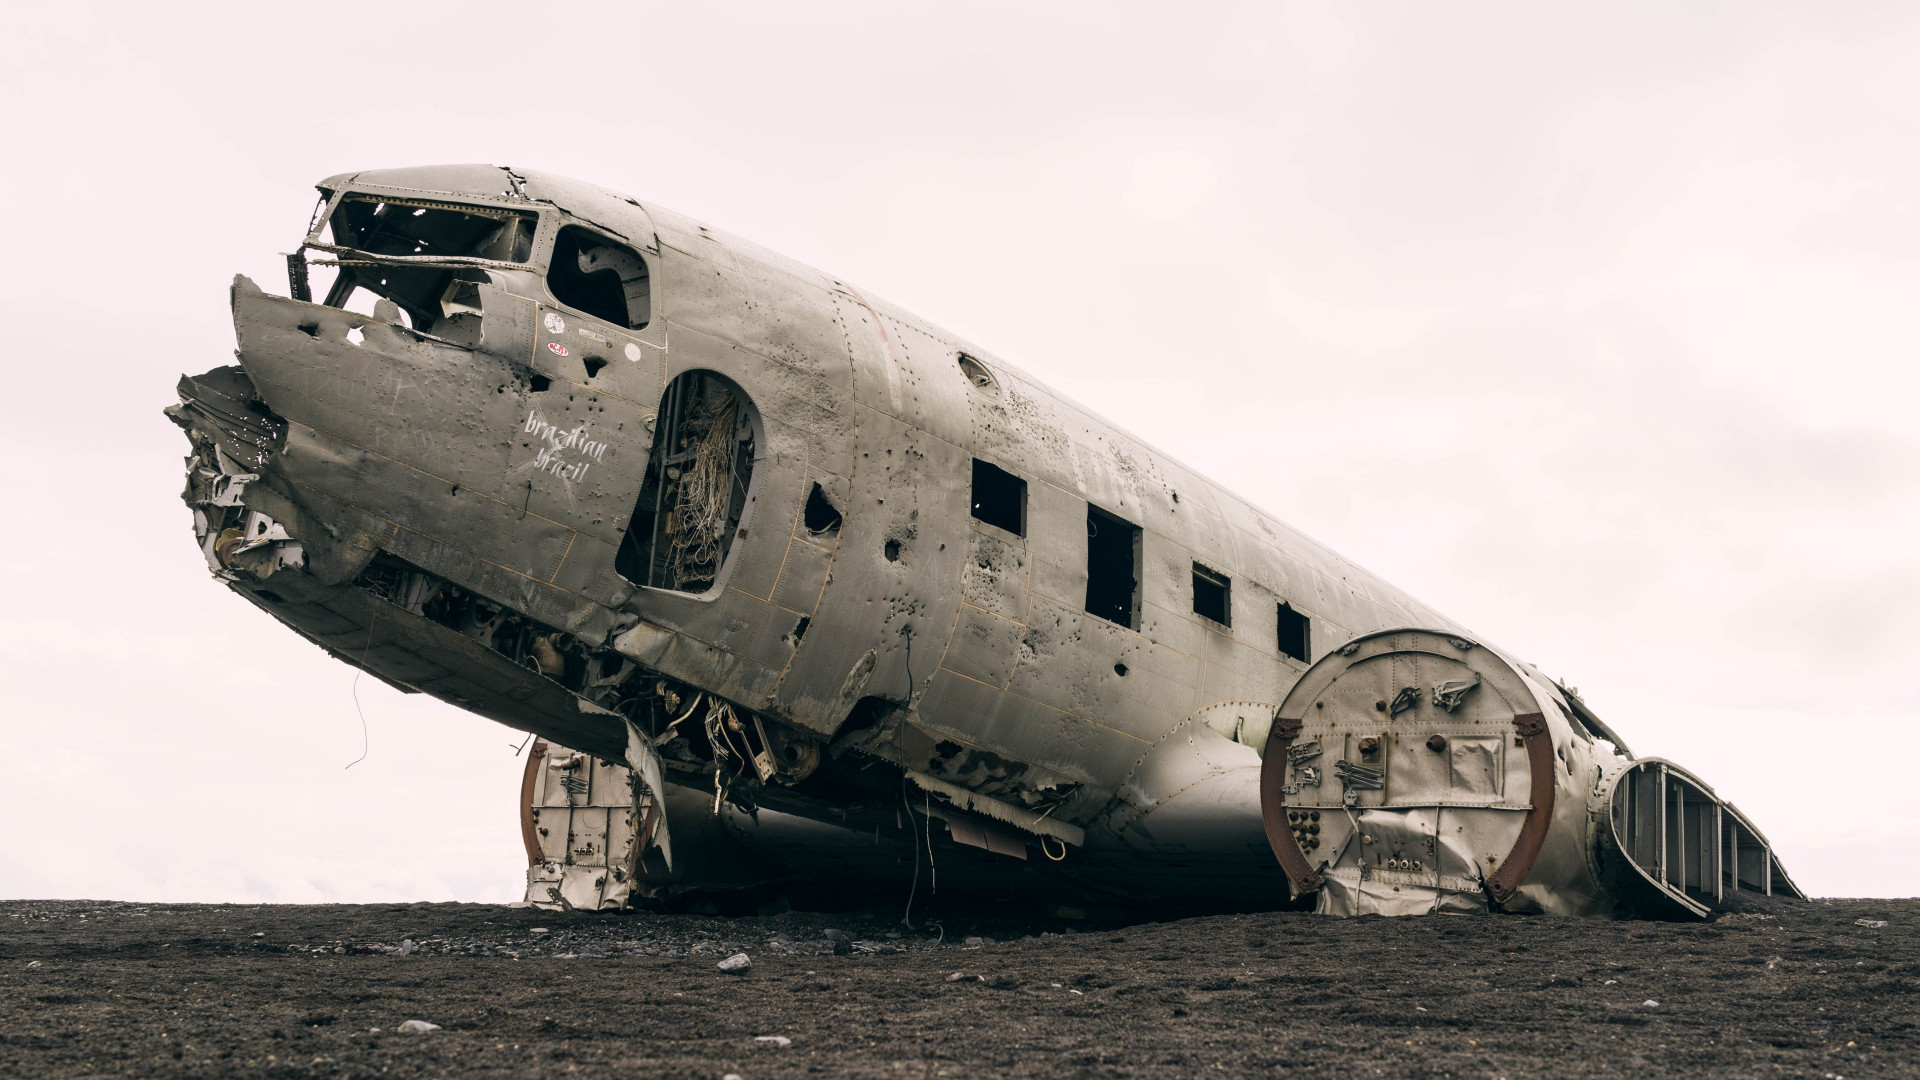 Wrecked airplane wallpaper 1920x1080